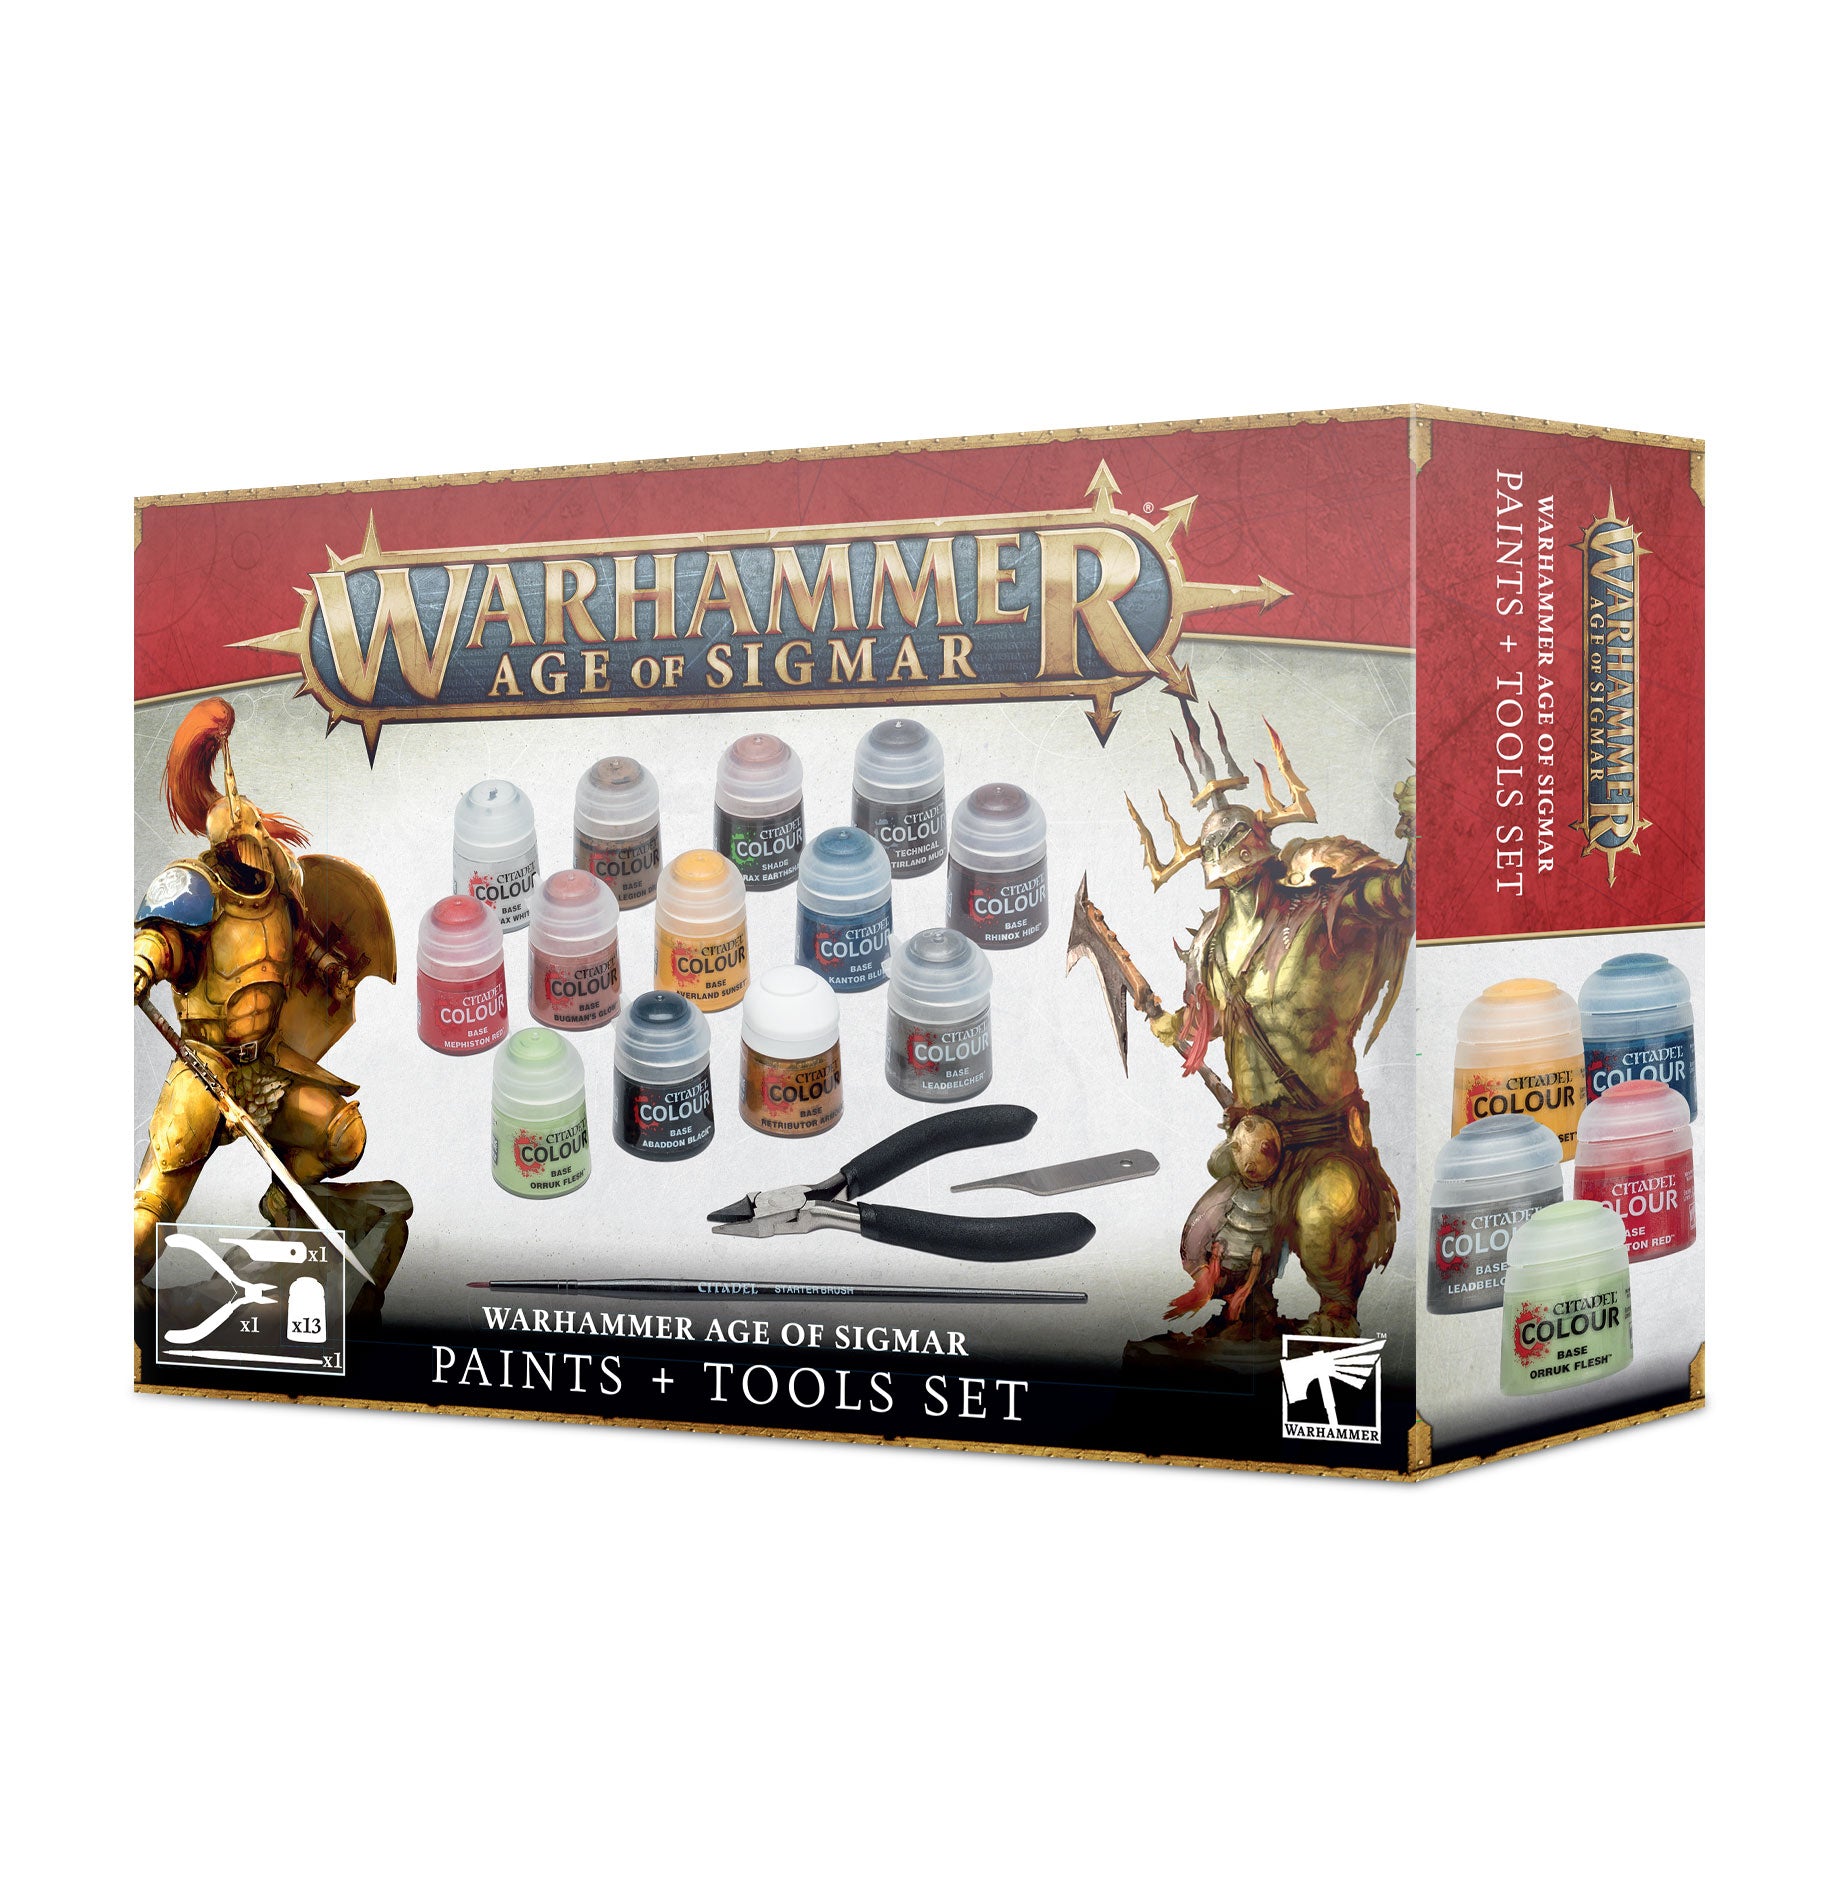 Warhammer: Age of Sigmar: Paints + Tools Set | RetroPlay Games